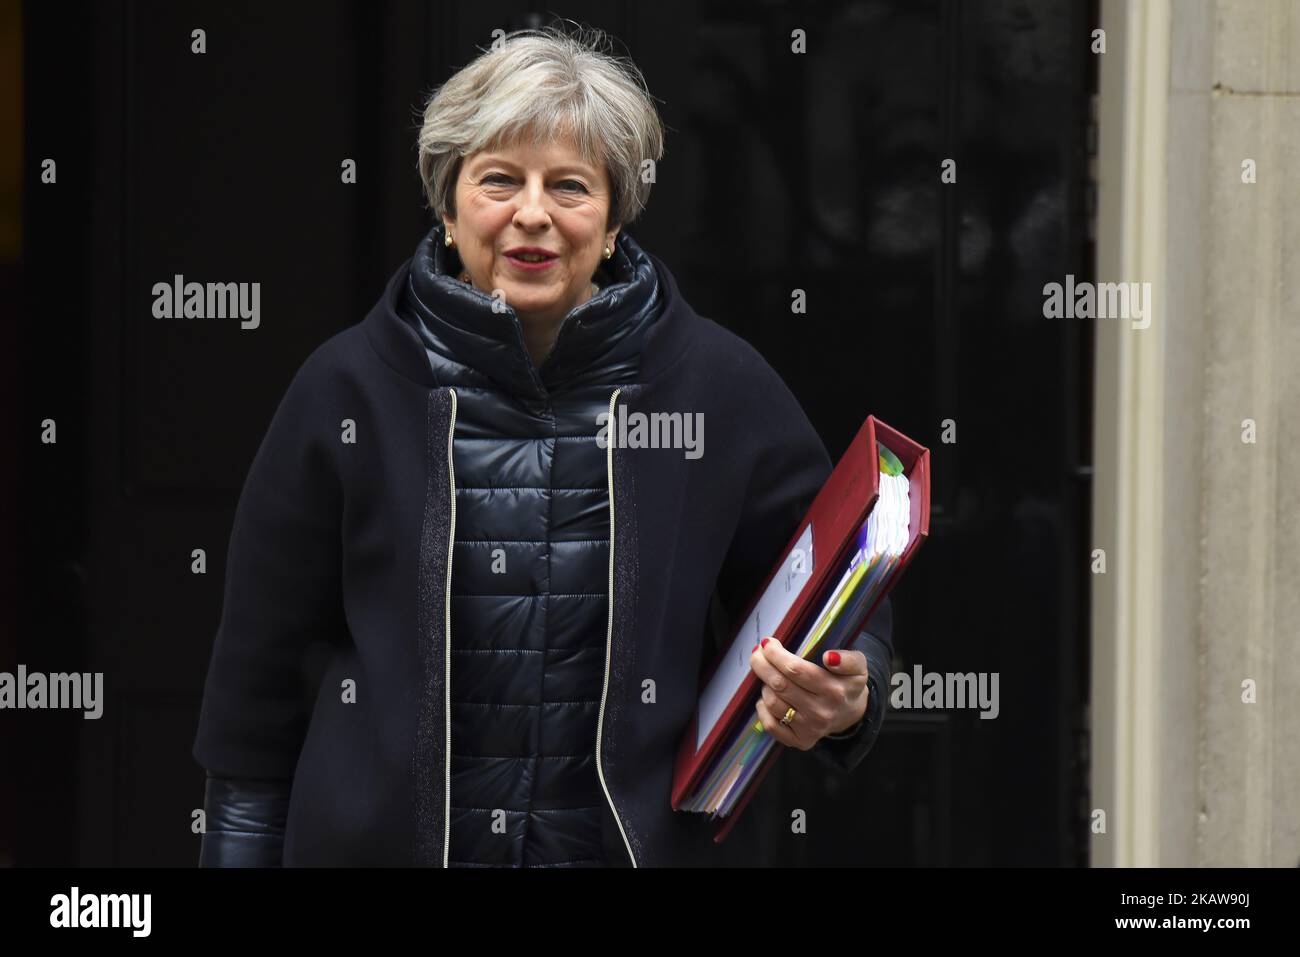 Britain's Prime Minister Theresa May leaves 10 Downing street for the weekly Prime Minister Question (PMQ) session in the House of Commons in London on January 24, 2018.Theresa May will travel to Davos, Switzerland for the World Economic Forum, where she is to speak on January 25. (Photo by Alberto Pezzali/NurPhoto) Stock Photo